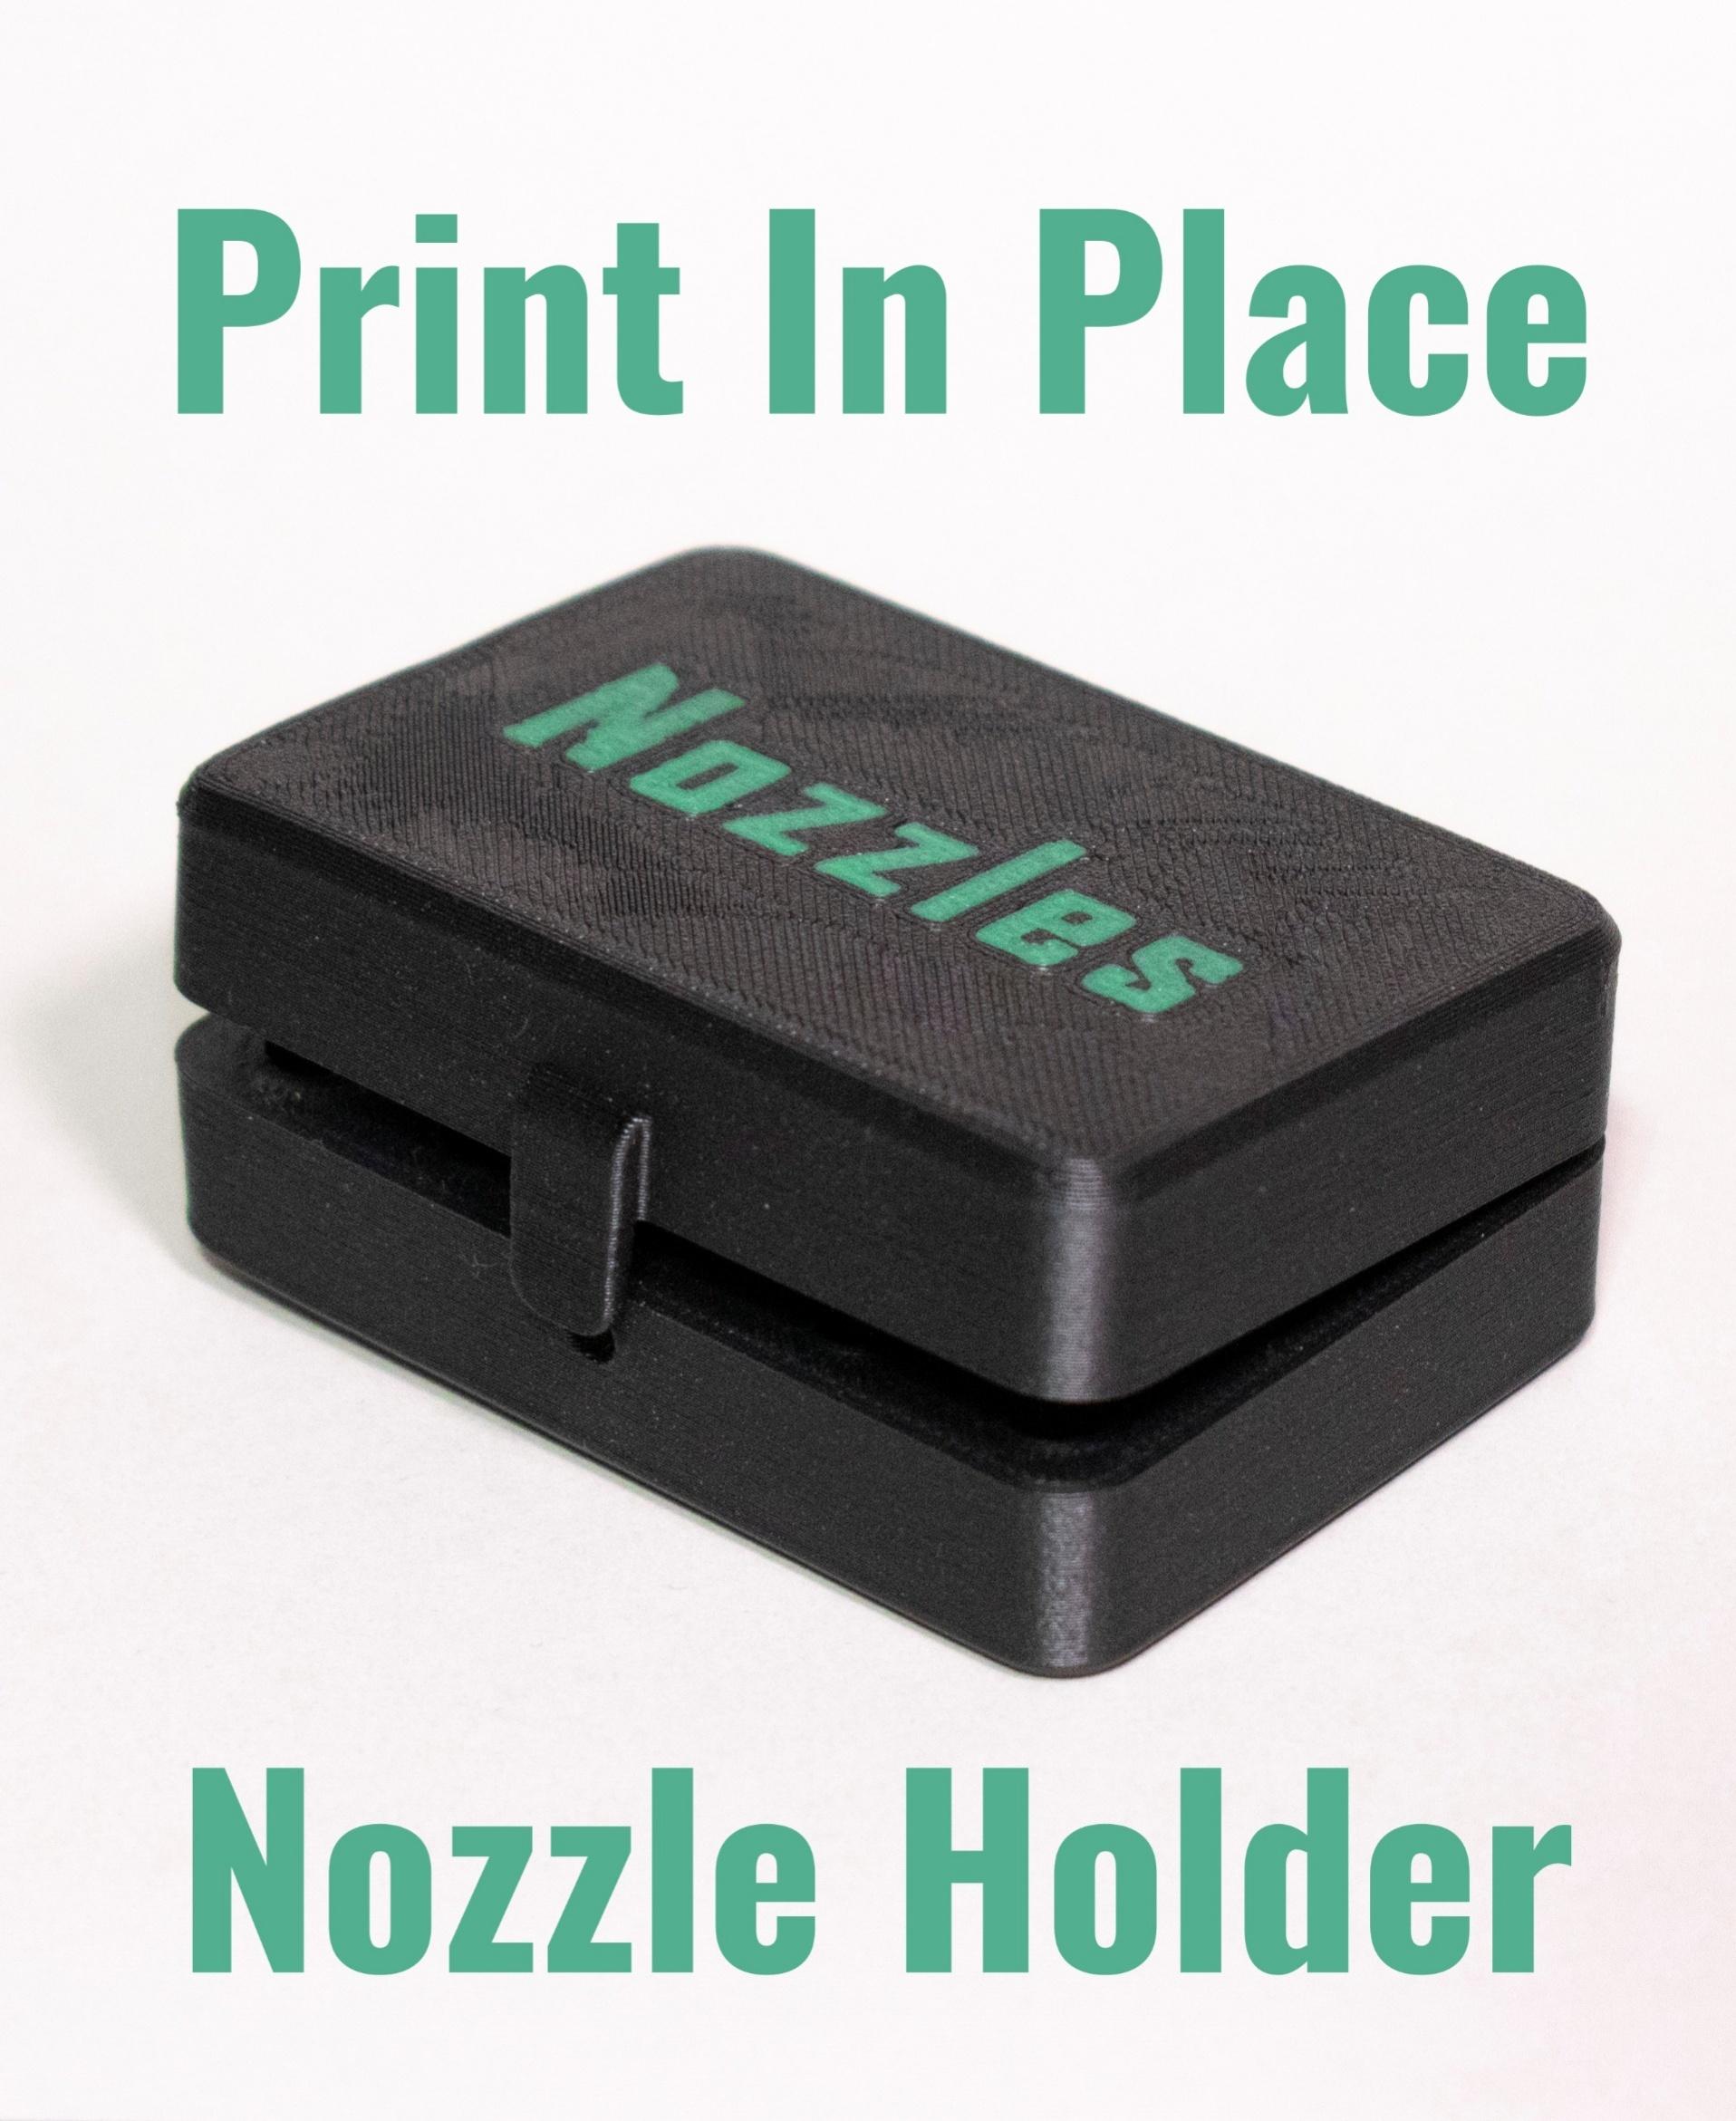 Print In Place 3D Printer Nozzle Holder Box - Holds 20 Nozzles 3d model